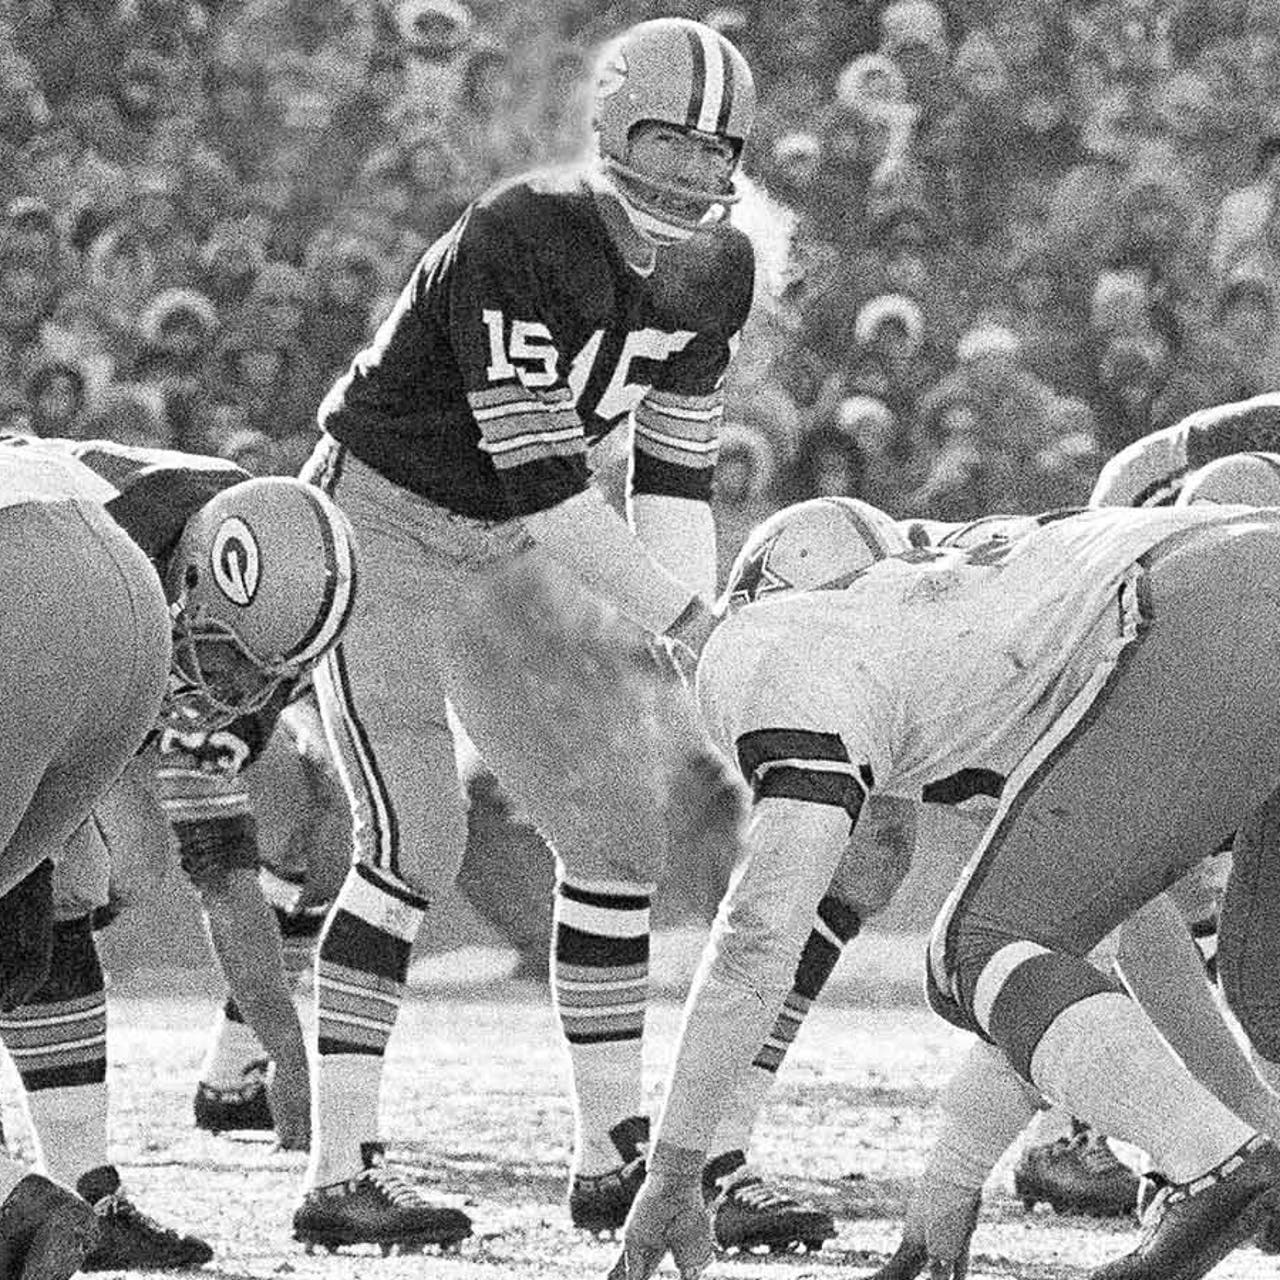 Tales from the cold: Ice Bowl still chills 50 years later